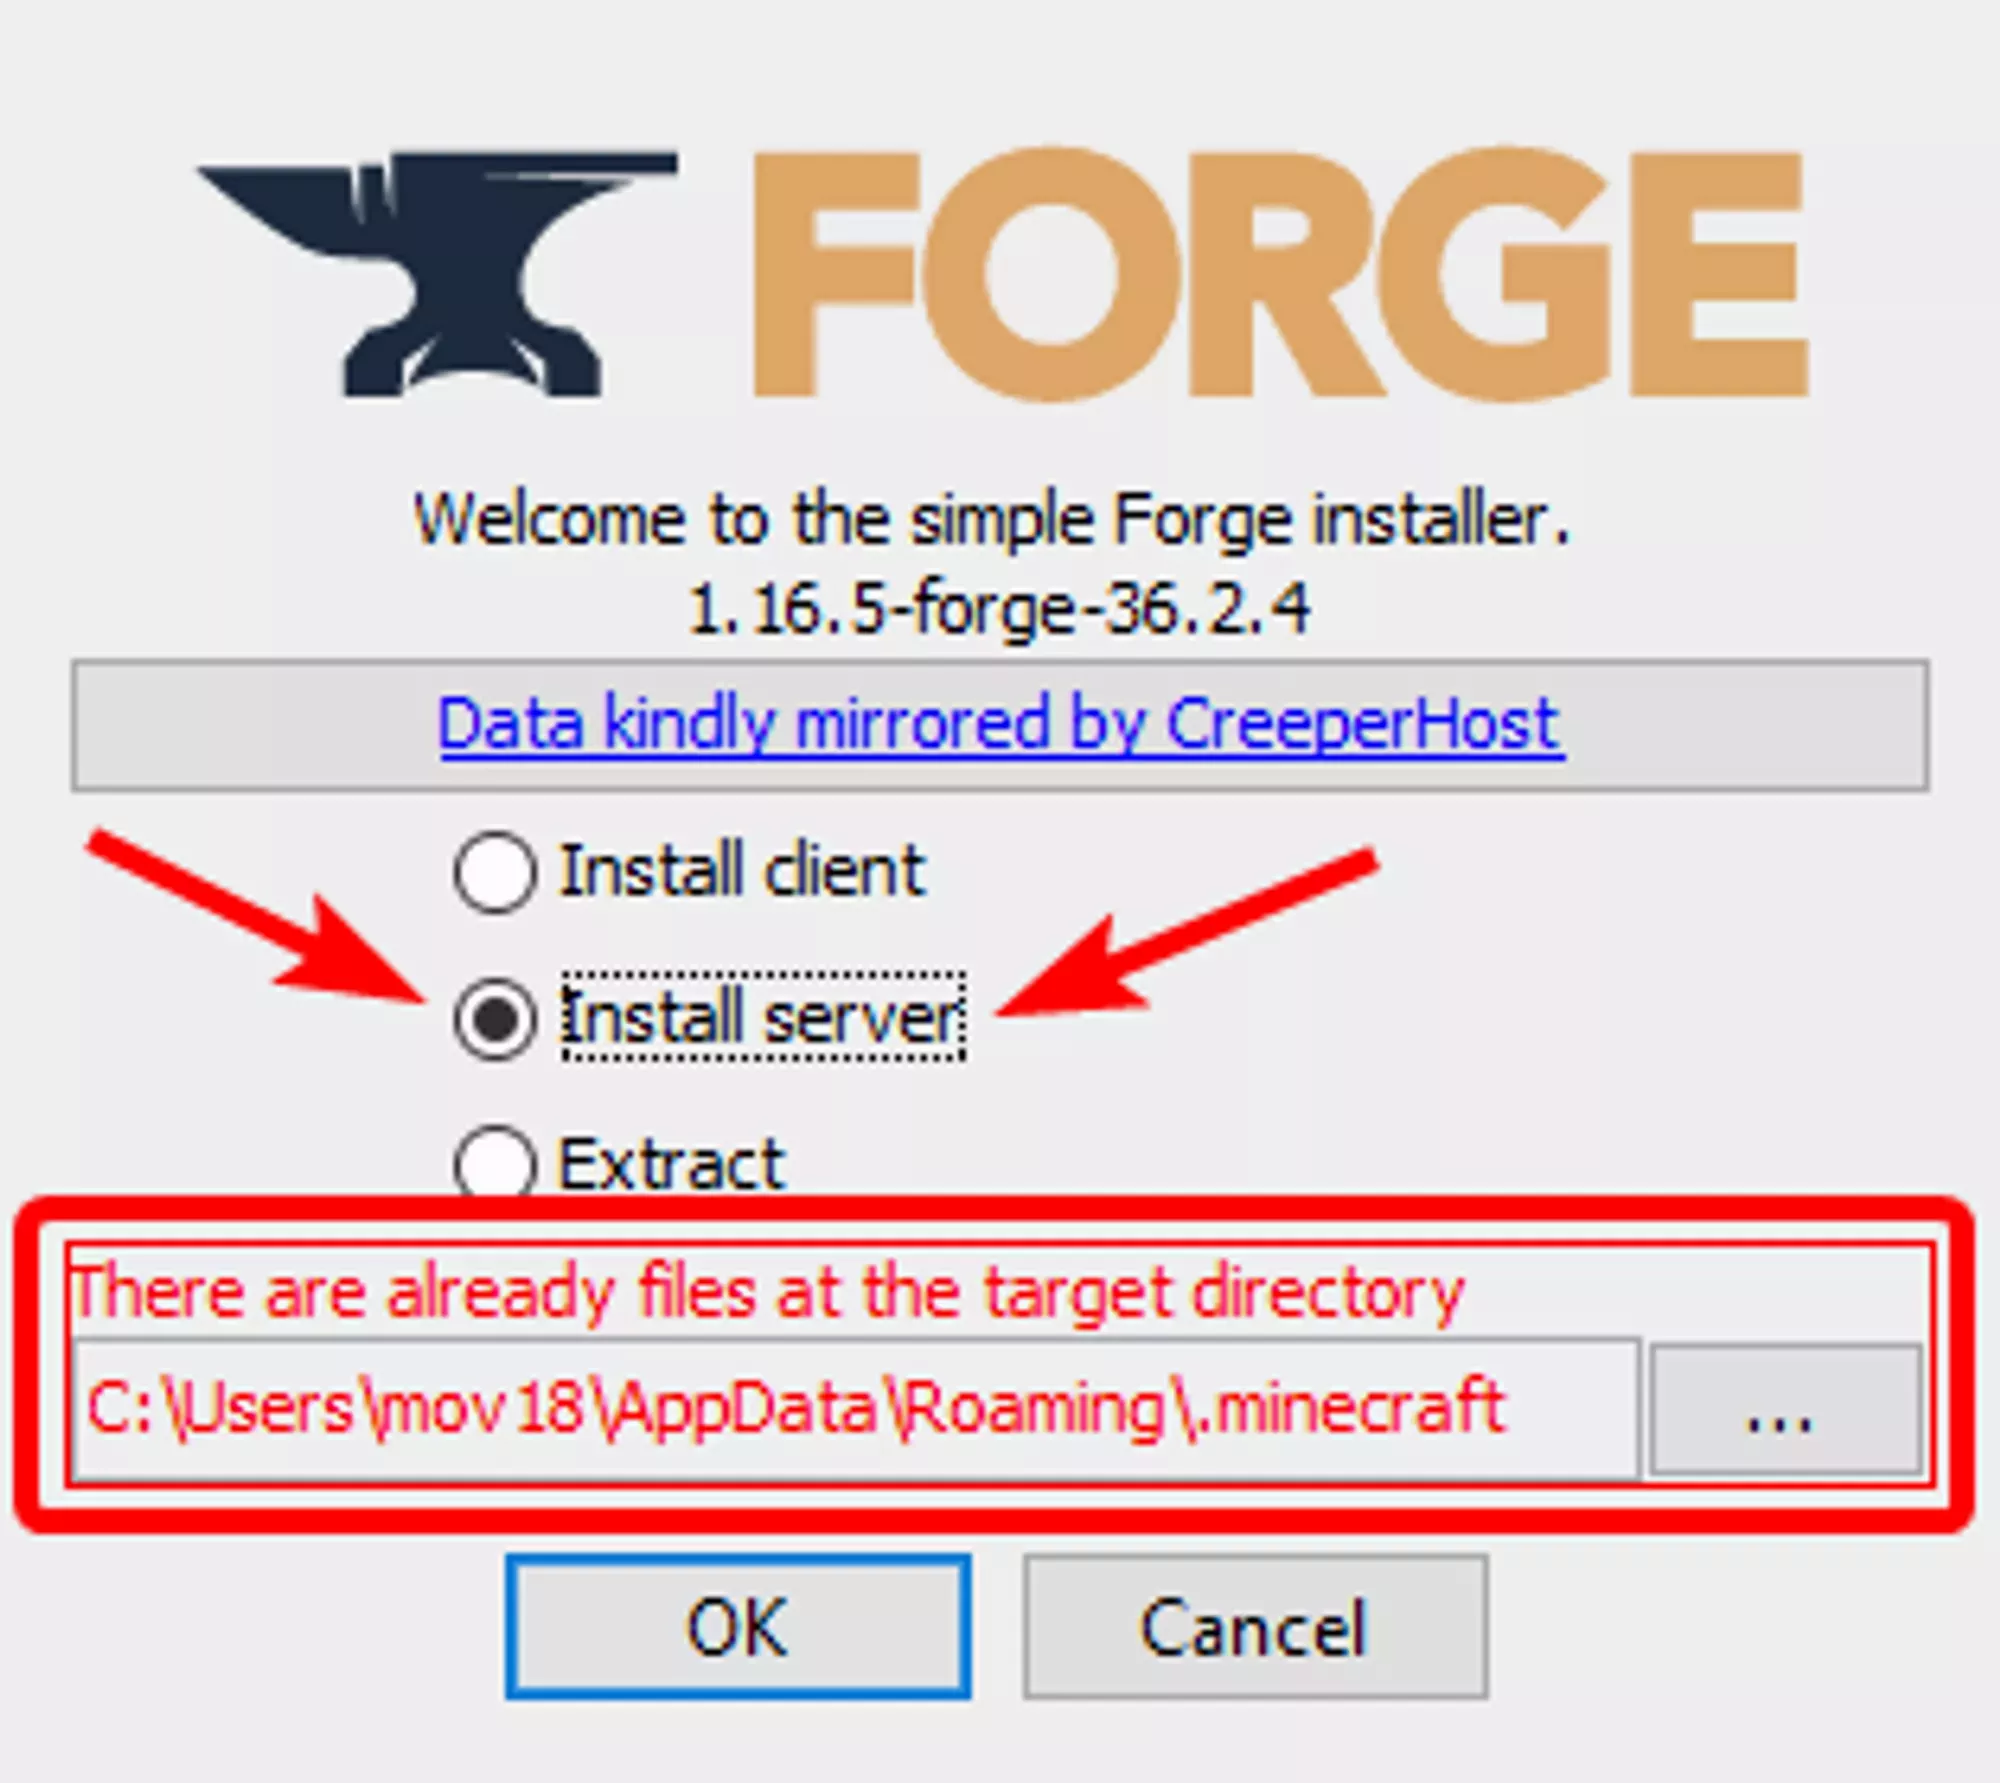 The Forge Installer popup with the Install Server option selected